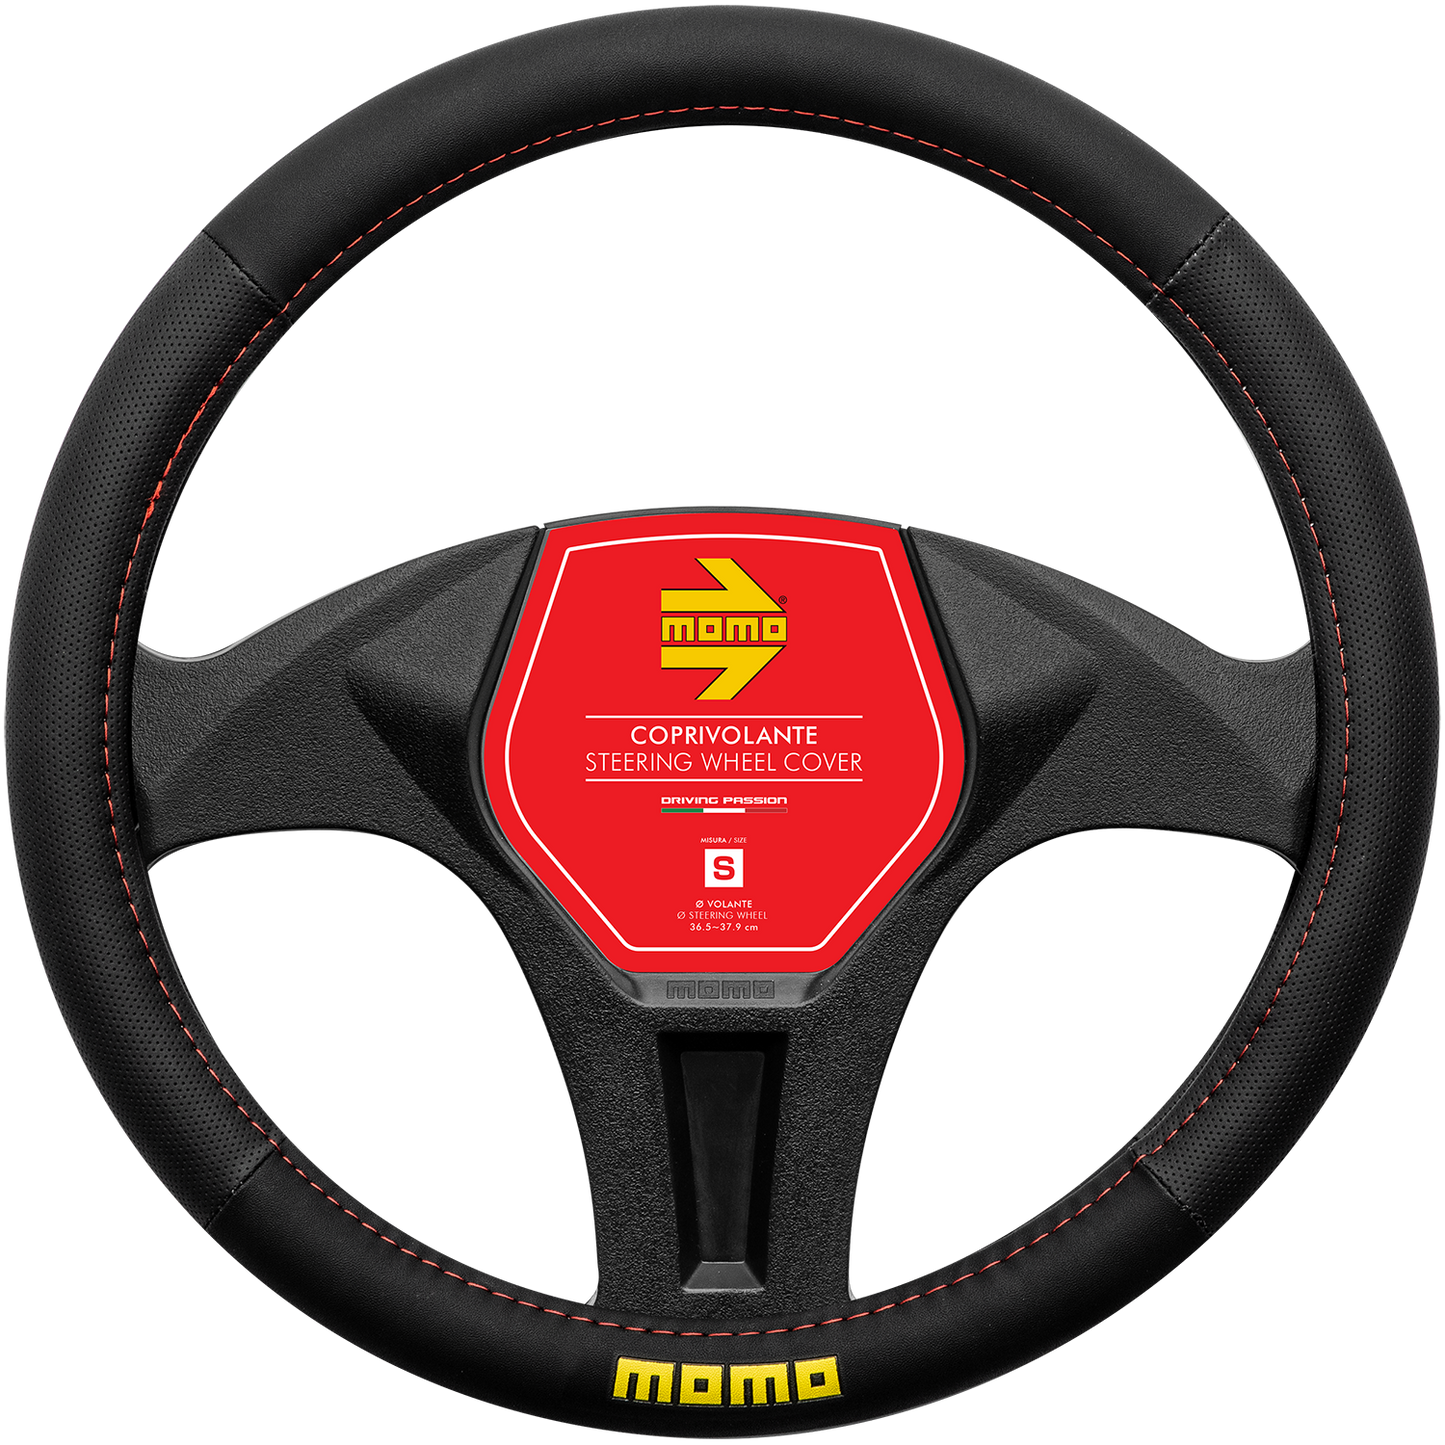 Momo Steering Wheel Cover - EASY - RED - SIZE S